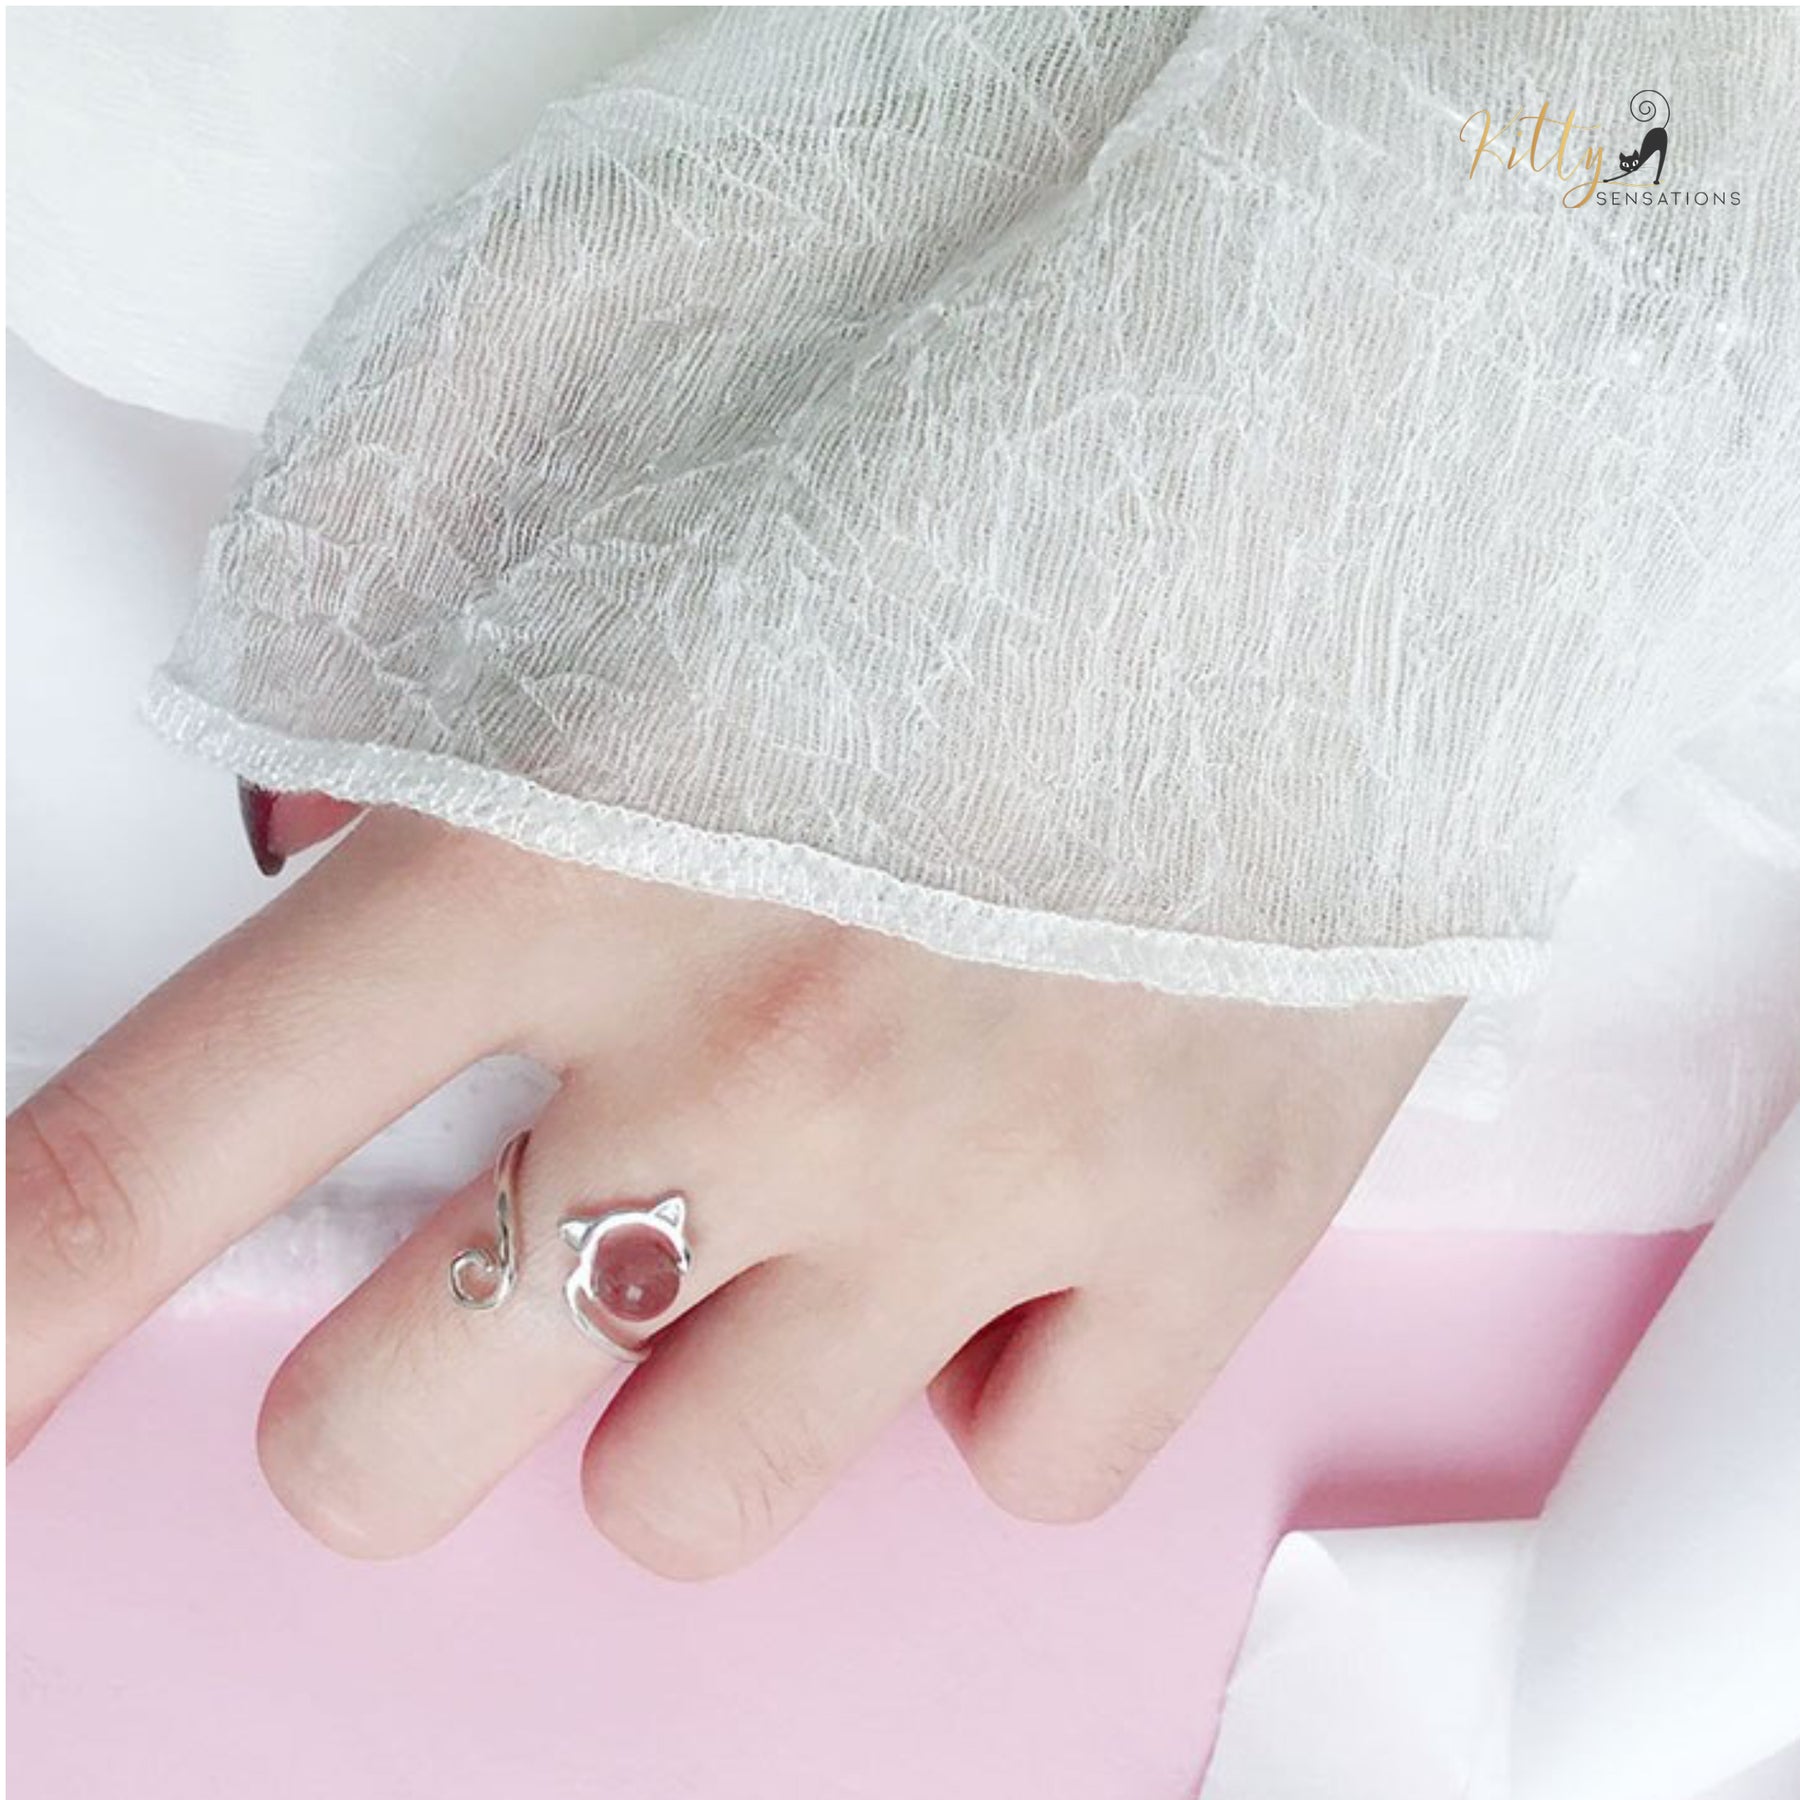 Crystal Face Cat Ring in Solid 925 Sterling Silver - Adjustable  Size ($46.31): https://www.kittysensations.com/products/crystal-face-cat-ring?_pos=1&_sid=b671f3198&_ss=r